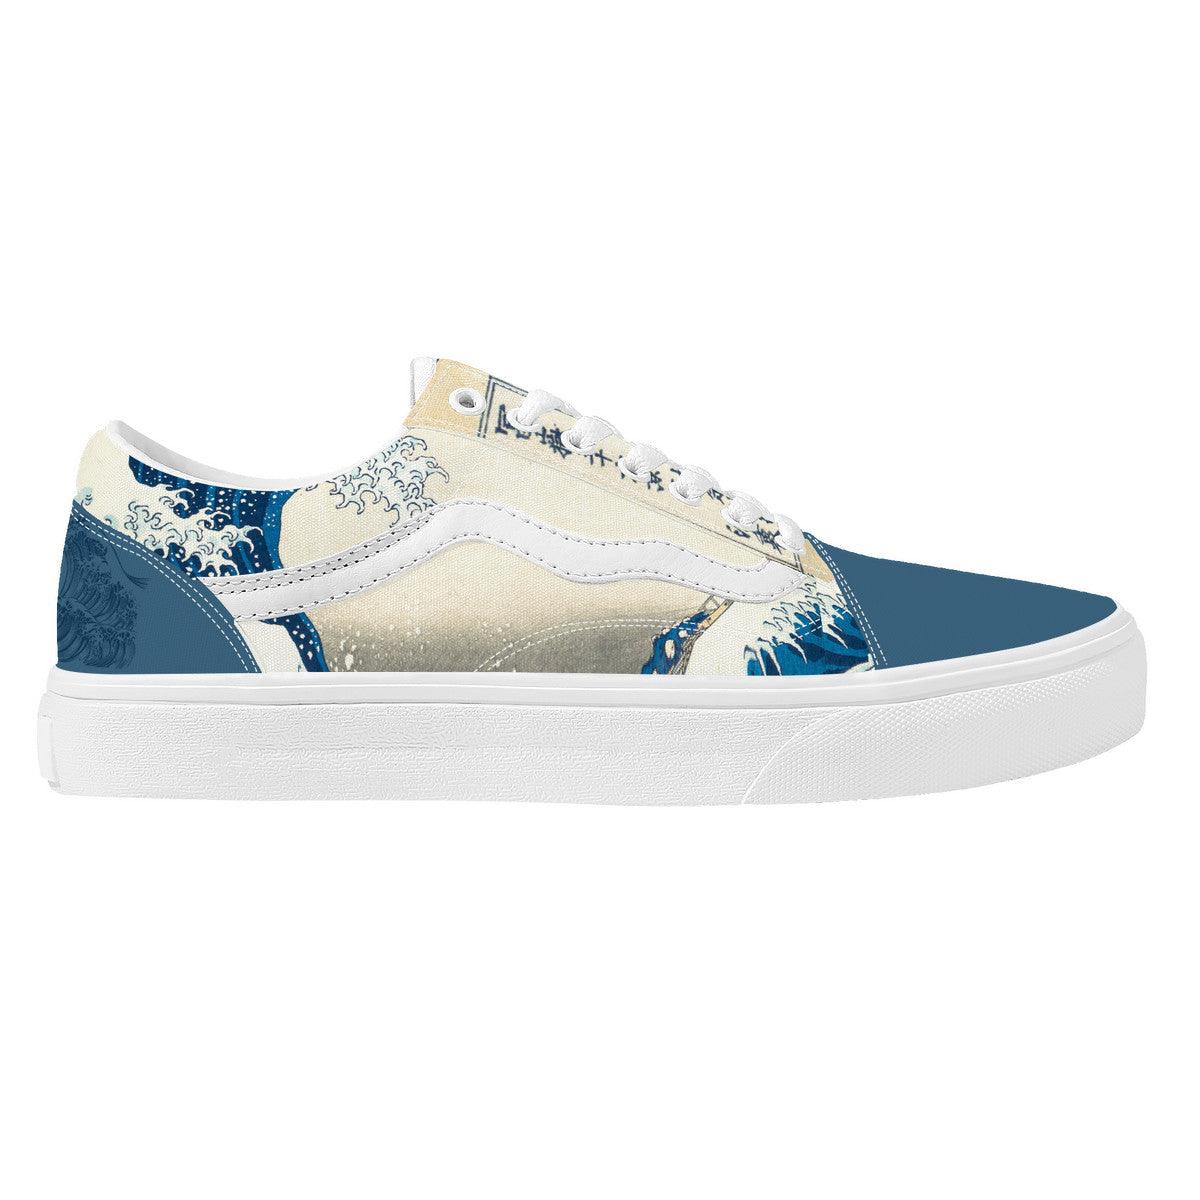 The Great Wave Low Top Flat Sneaker